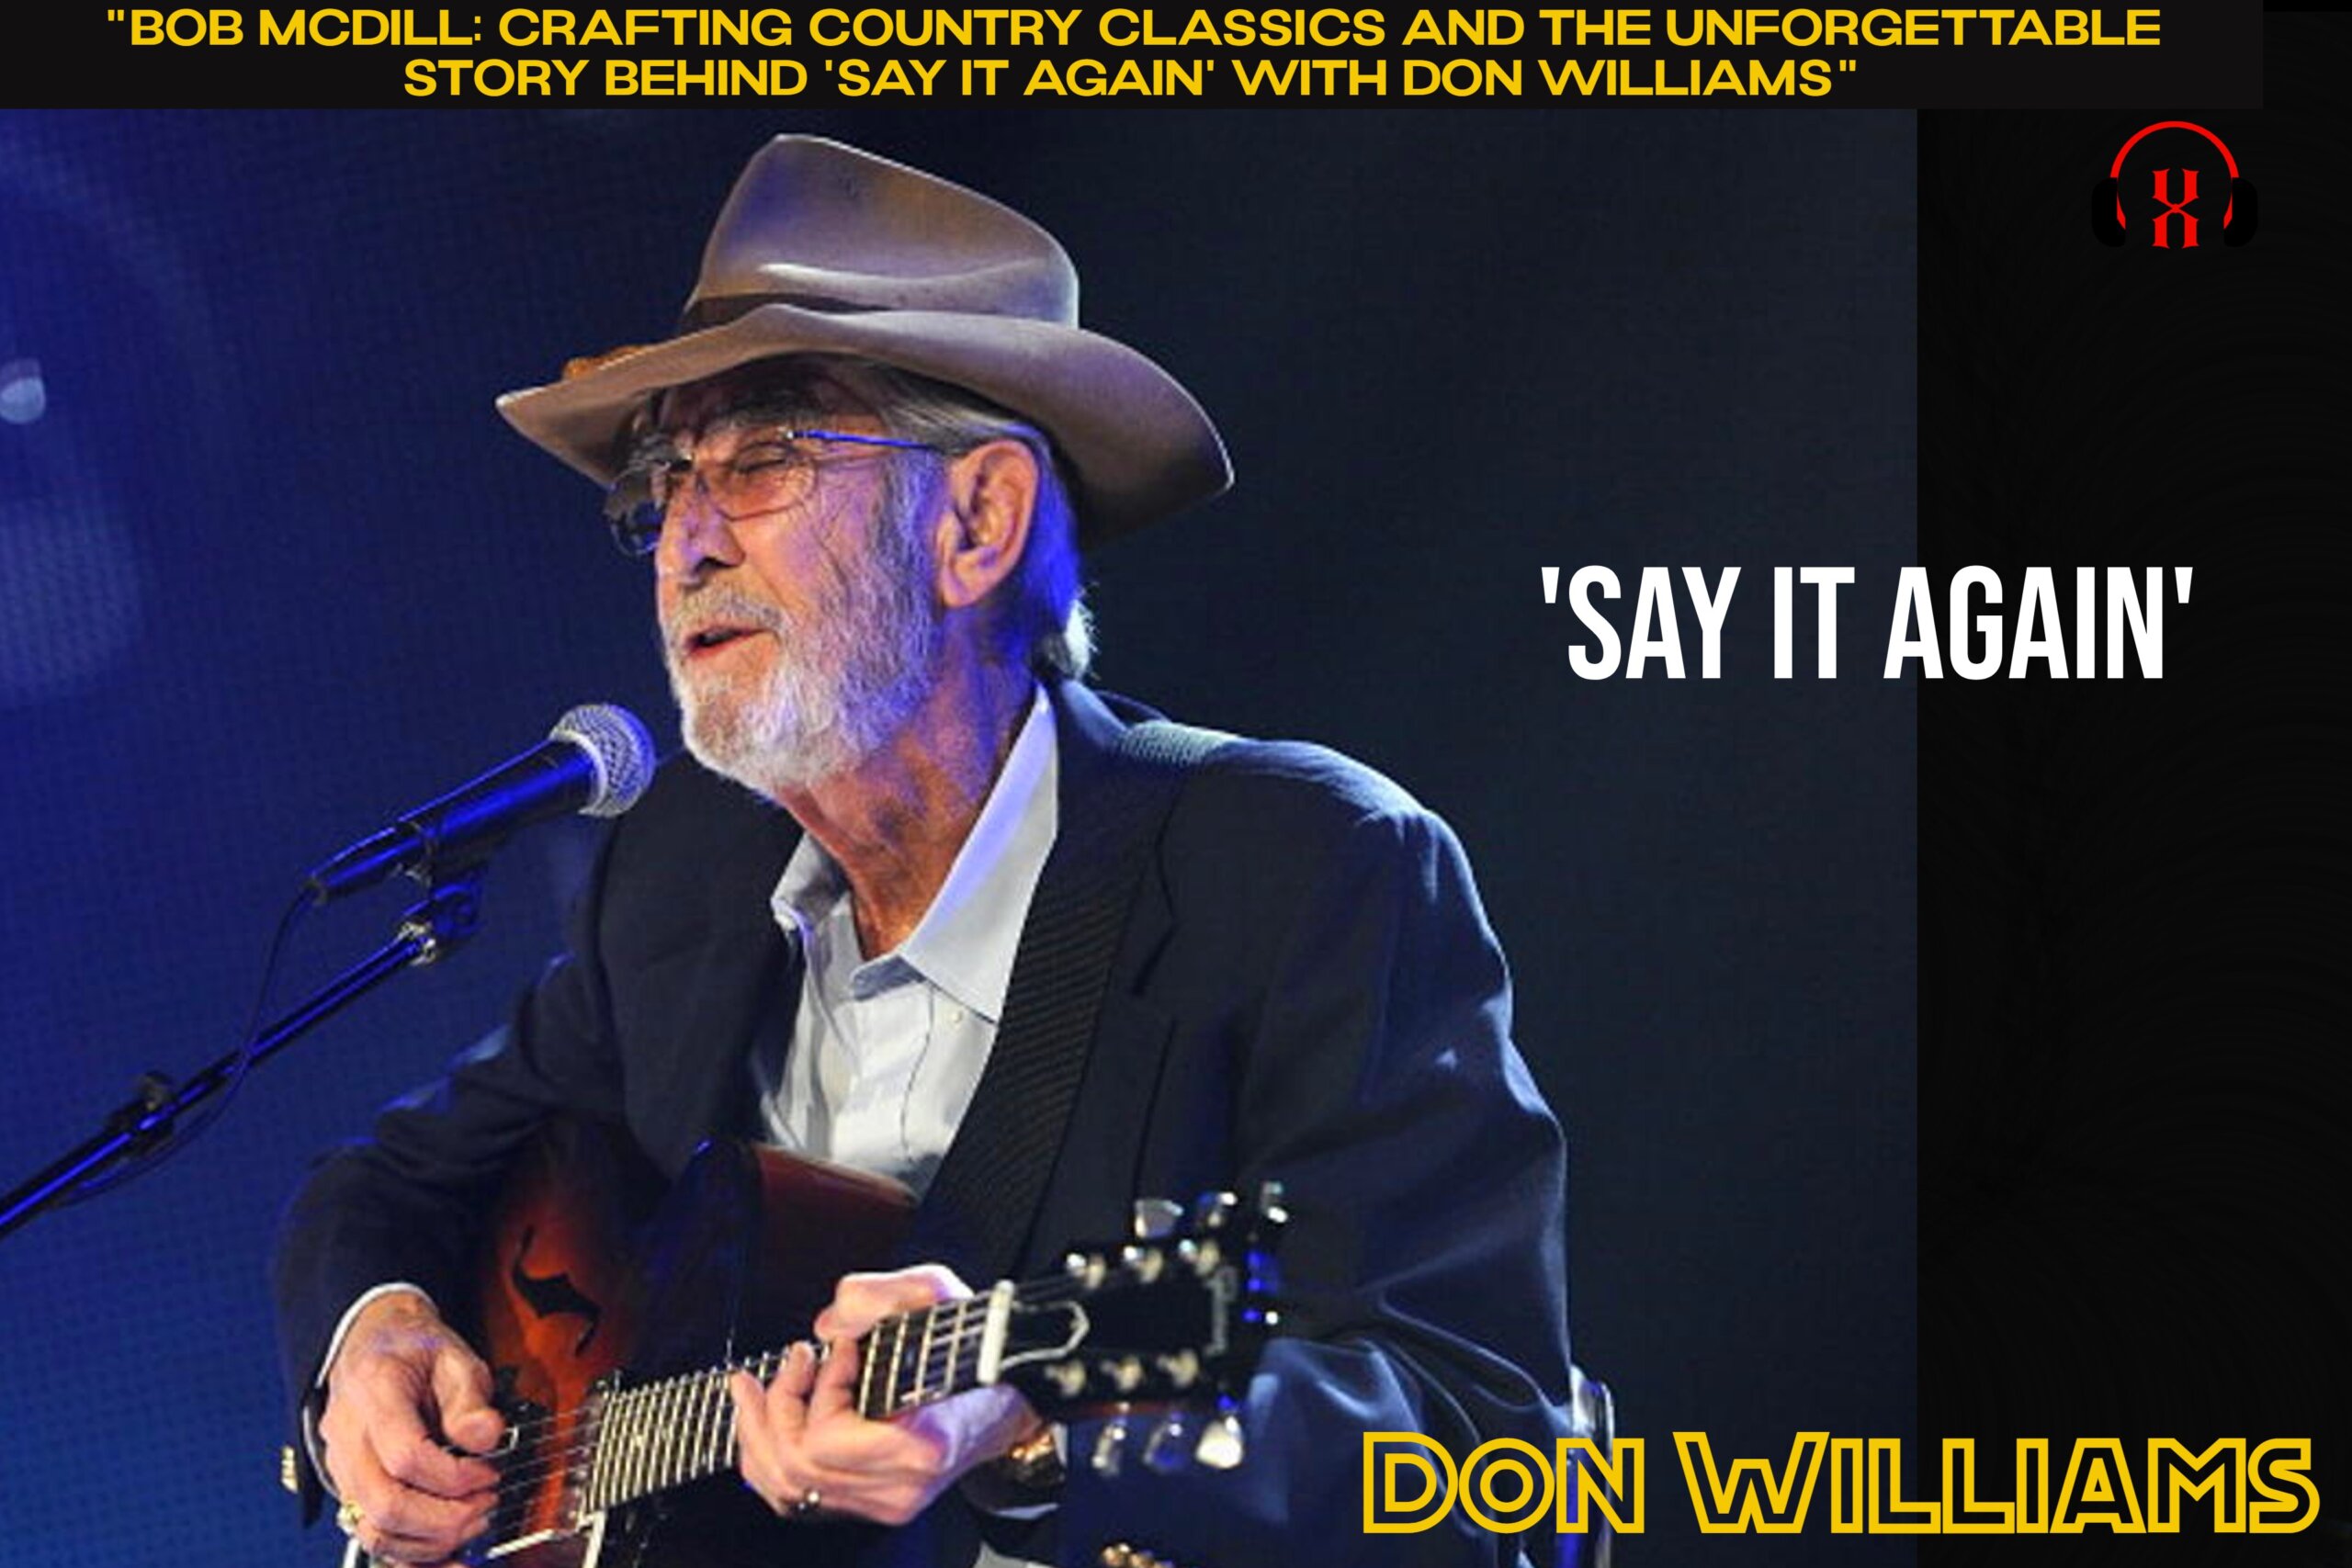 Don Williams's Say It Again